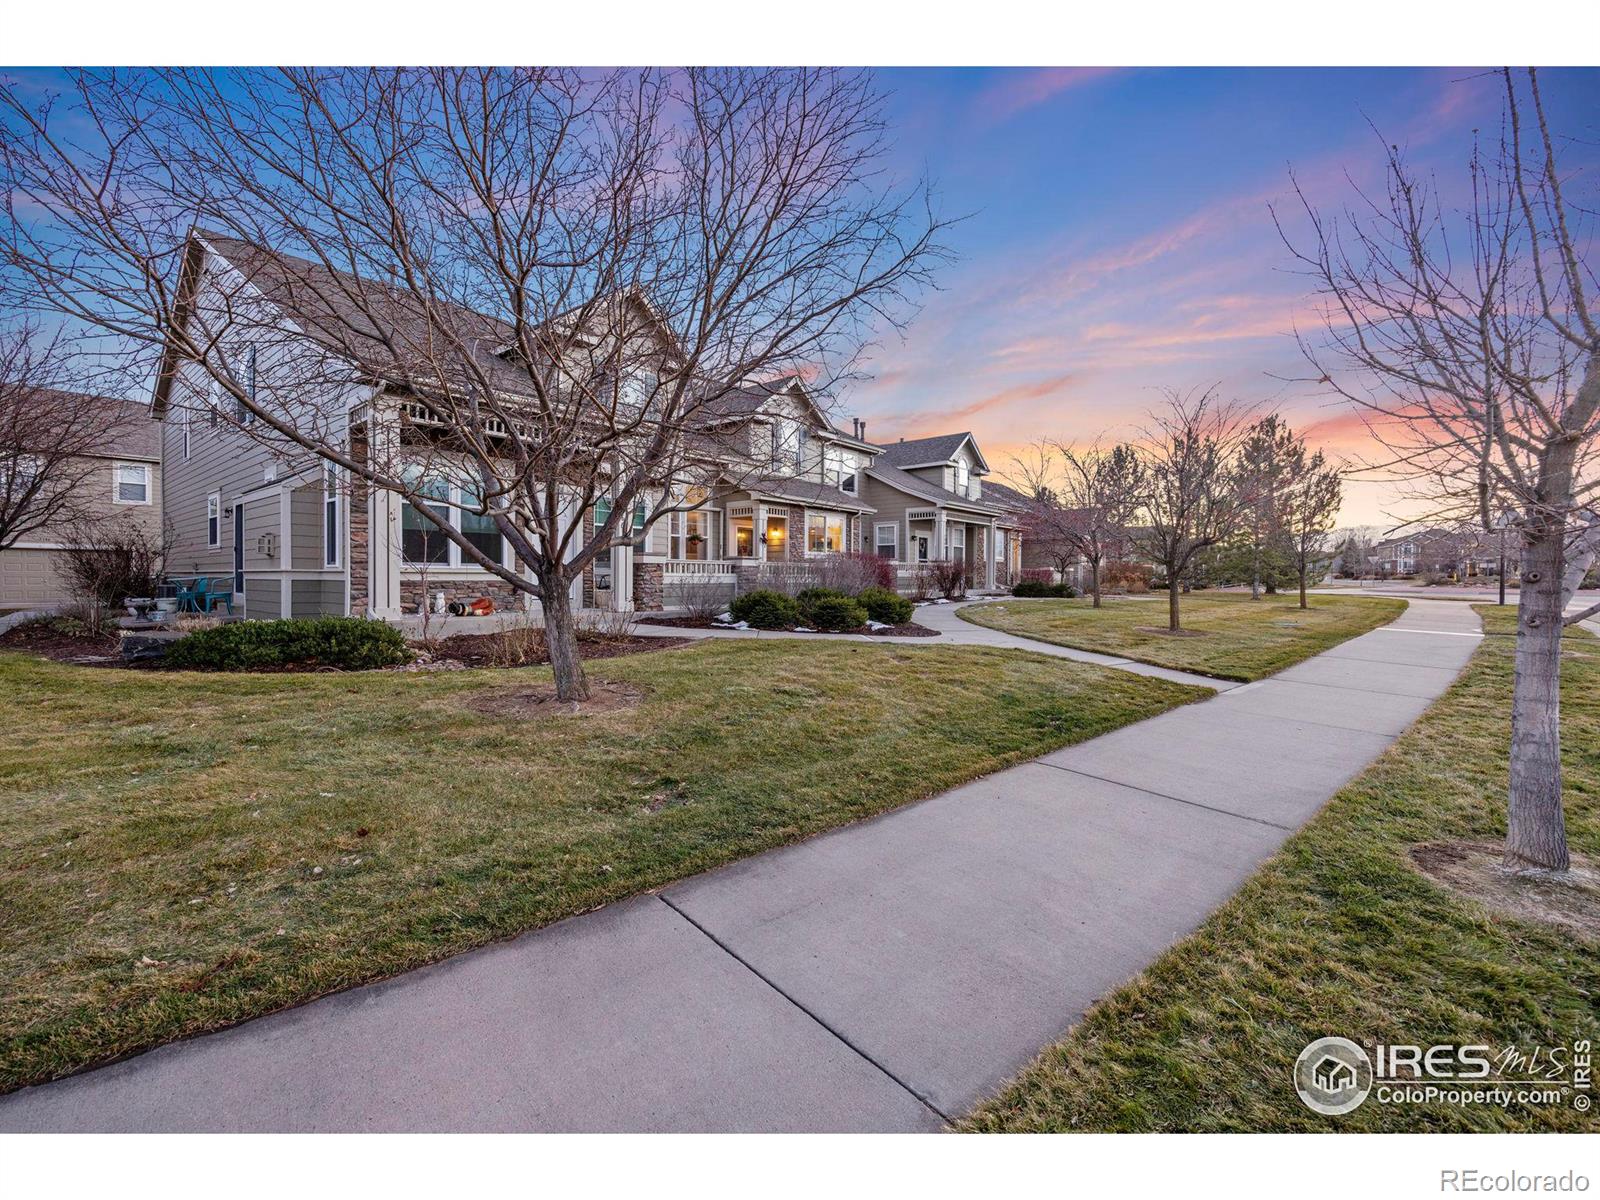 3070  tabernash drive, Loveland sold home. Closed on 2024-04-16 for $425,000.